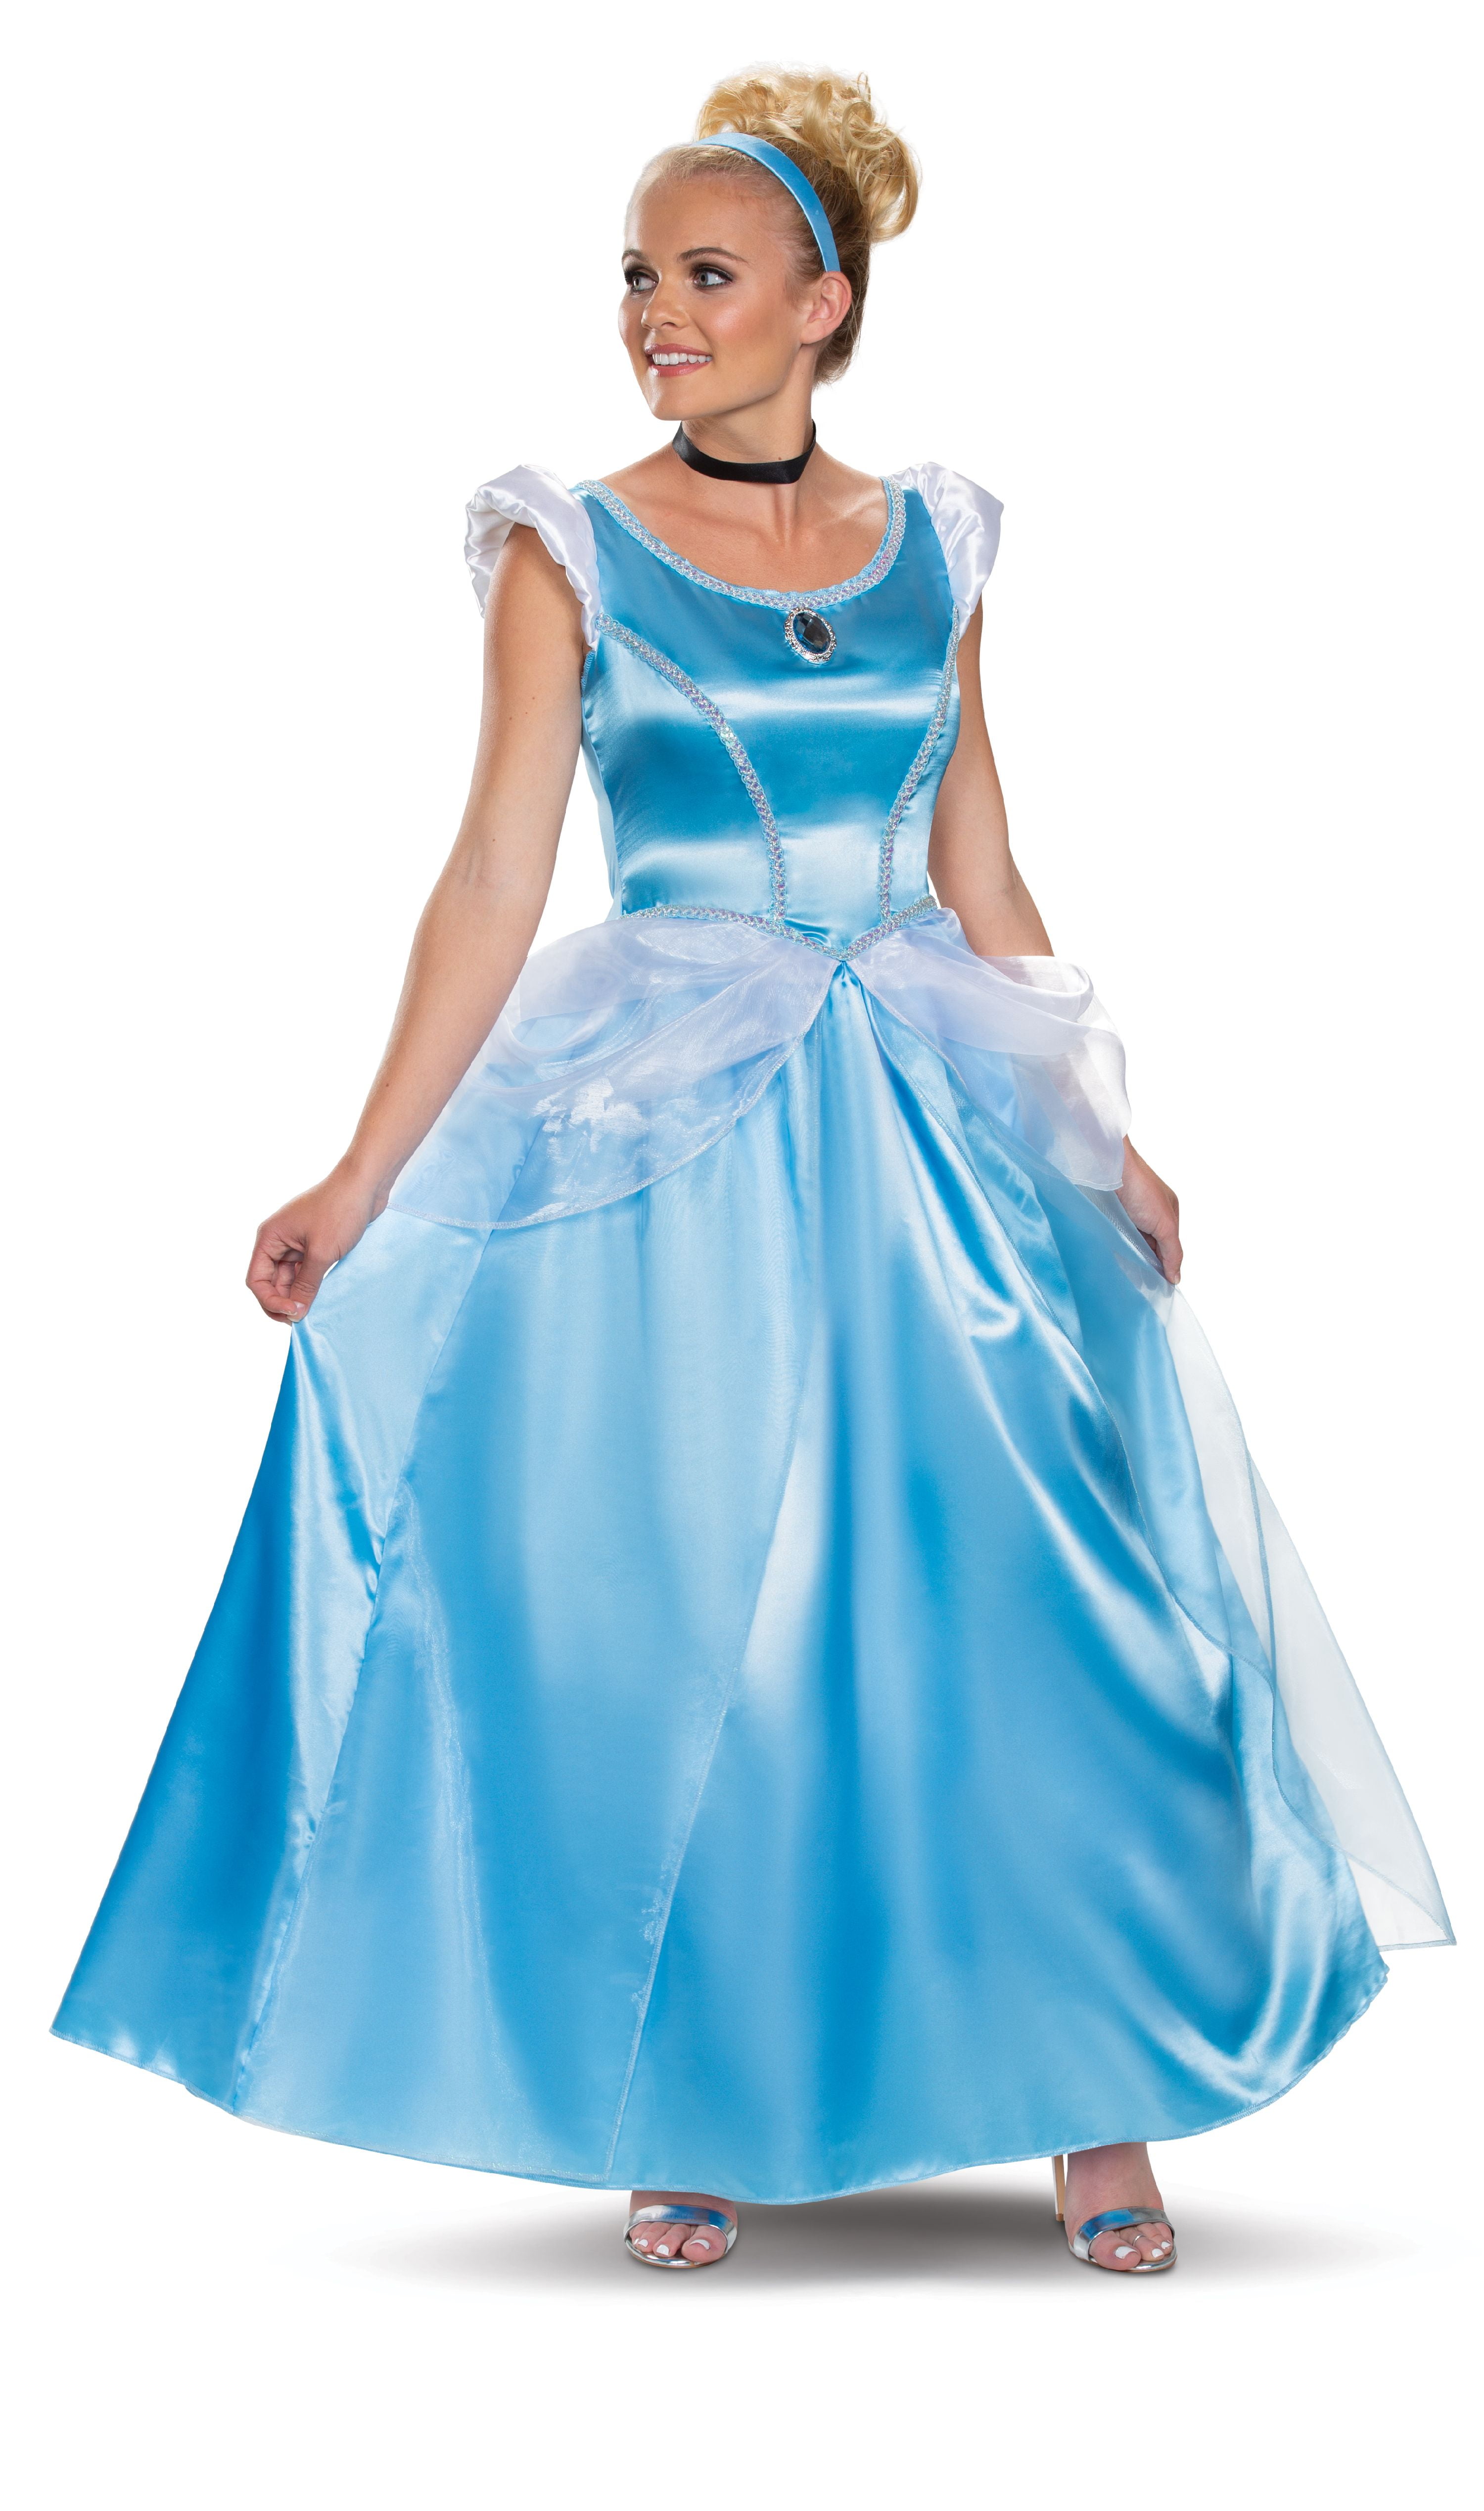 CINDERELLA Dress Up Deluxe Princess Adult Ball Gown Princess Fairytale Costume 